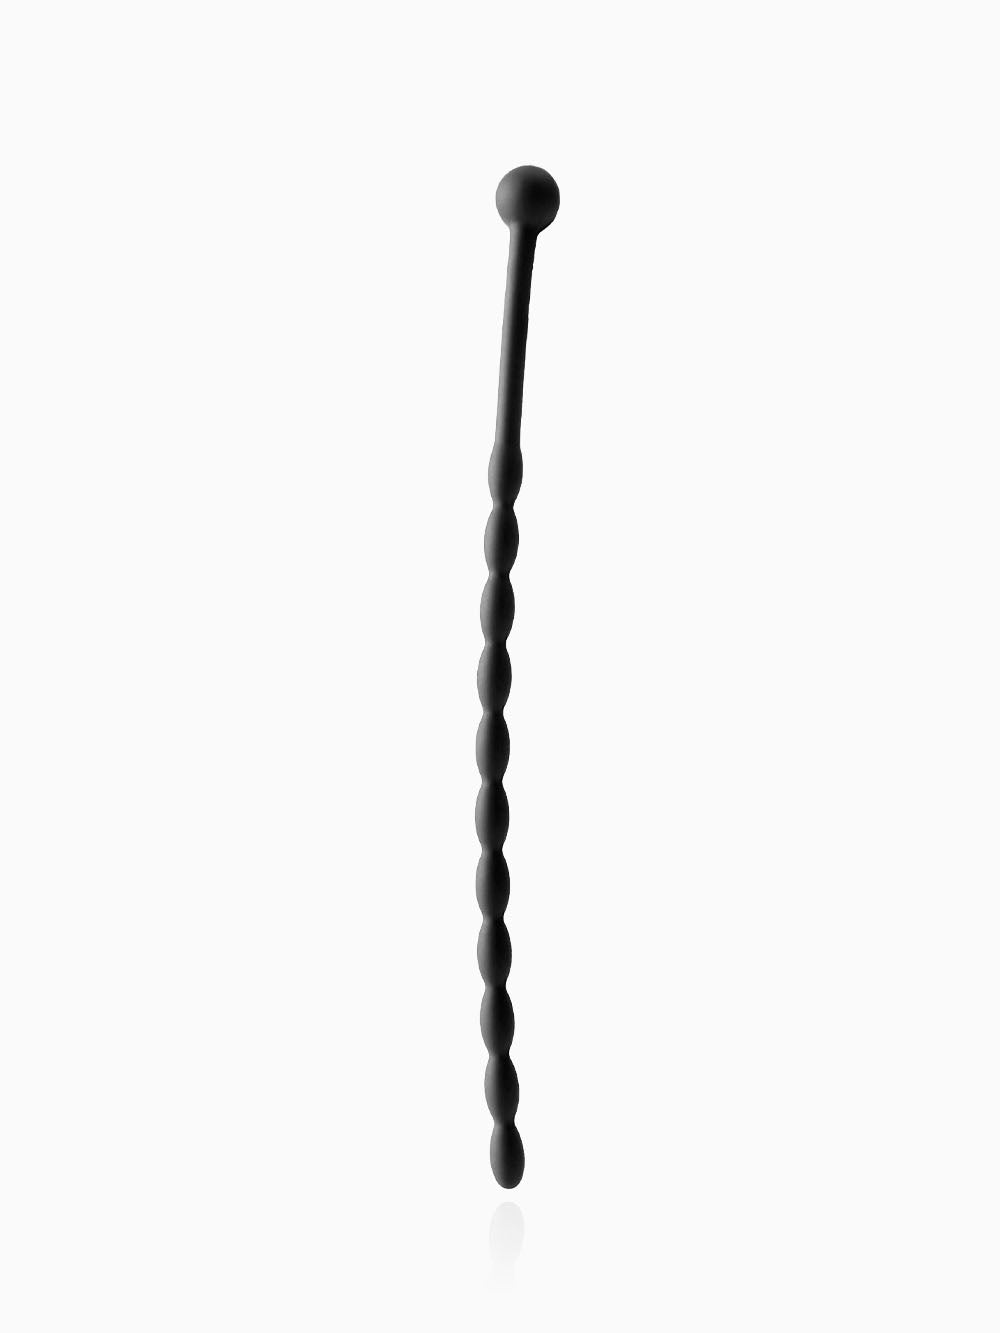 Pillow Talk Urethral Rod with Stopper 5.75 Inches